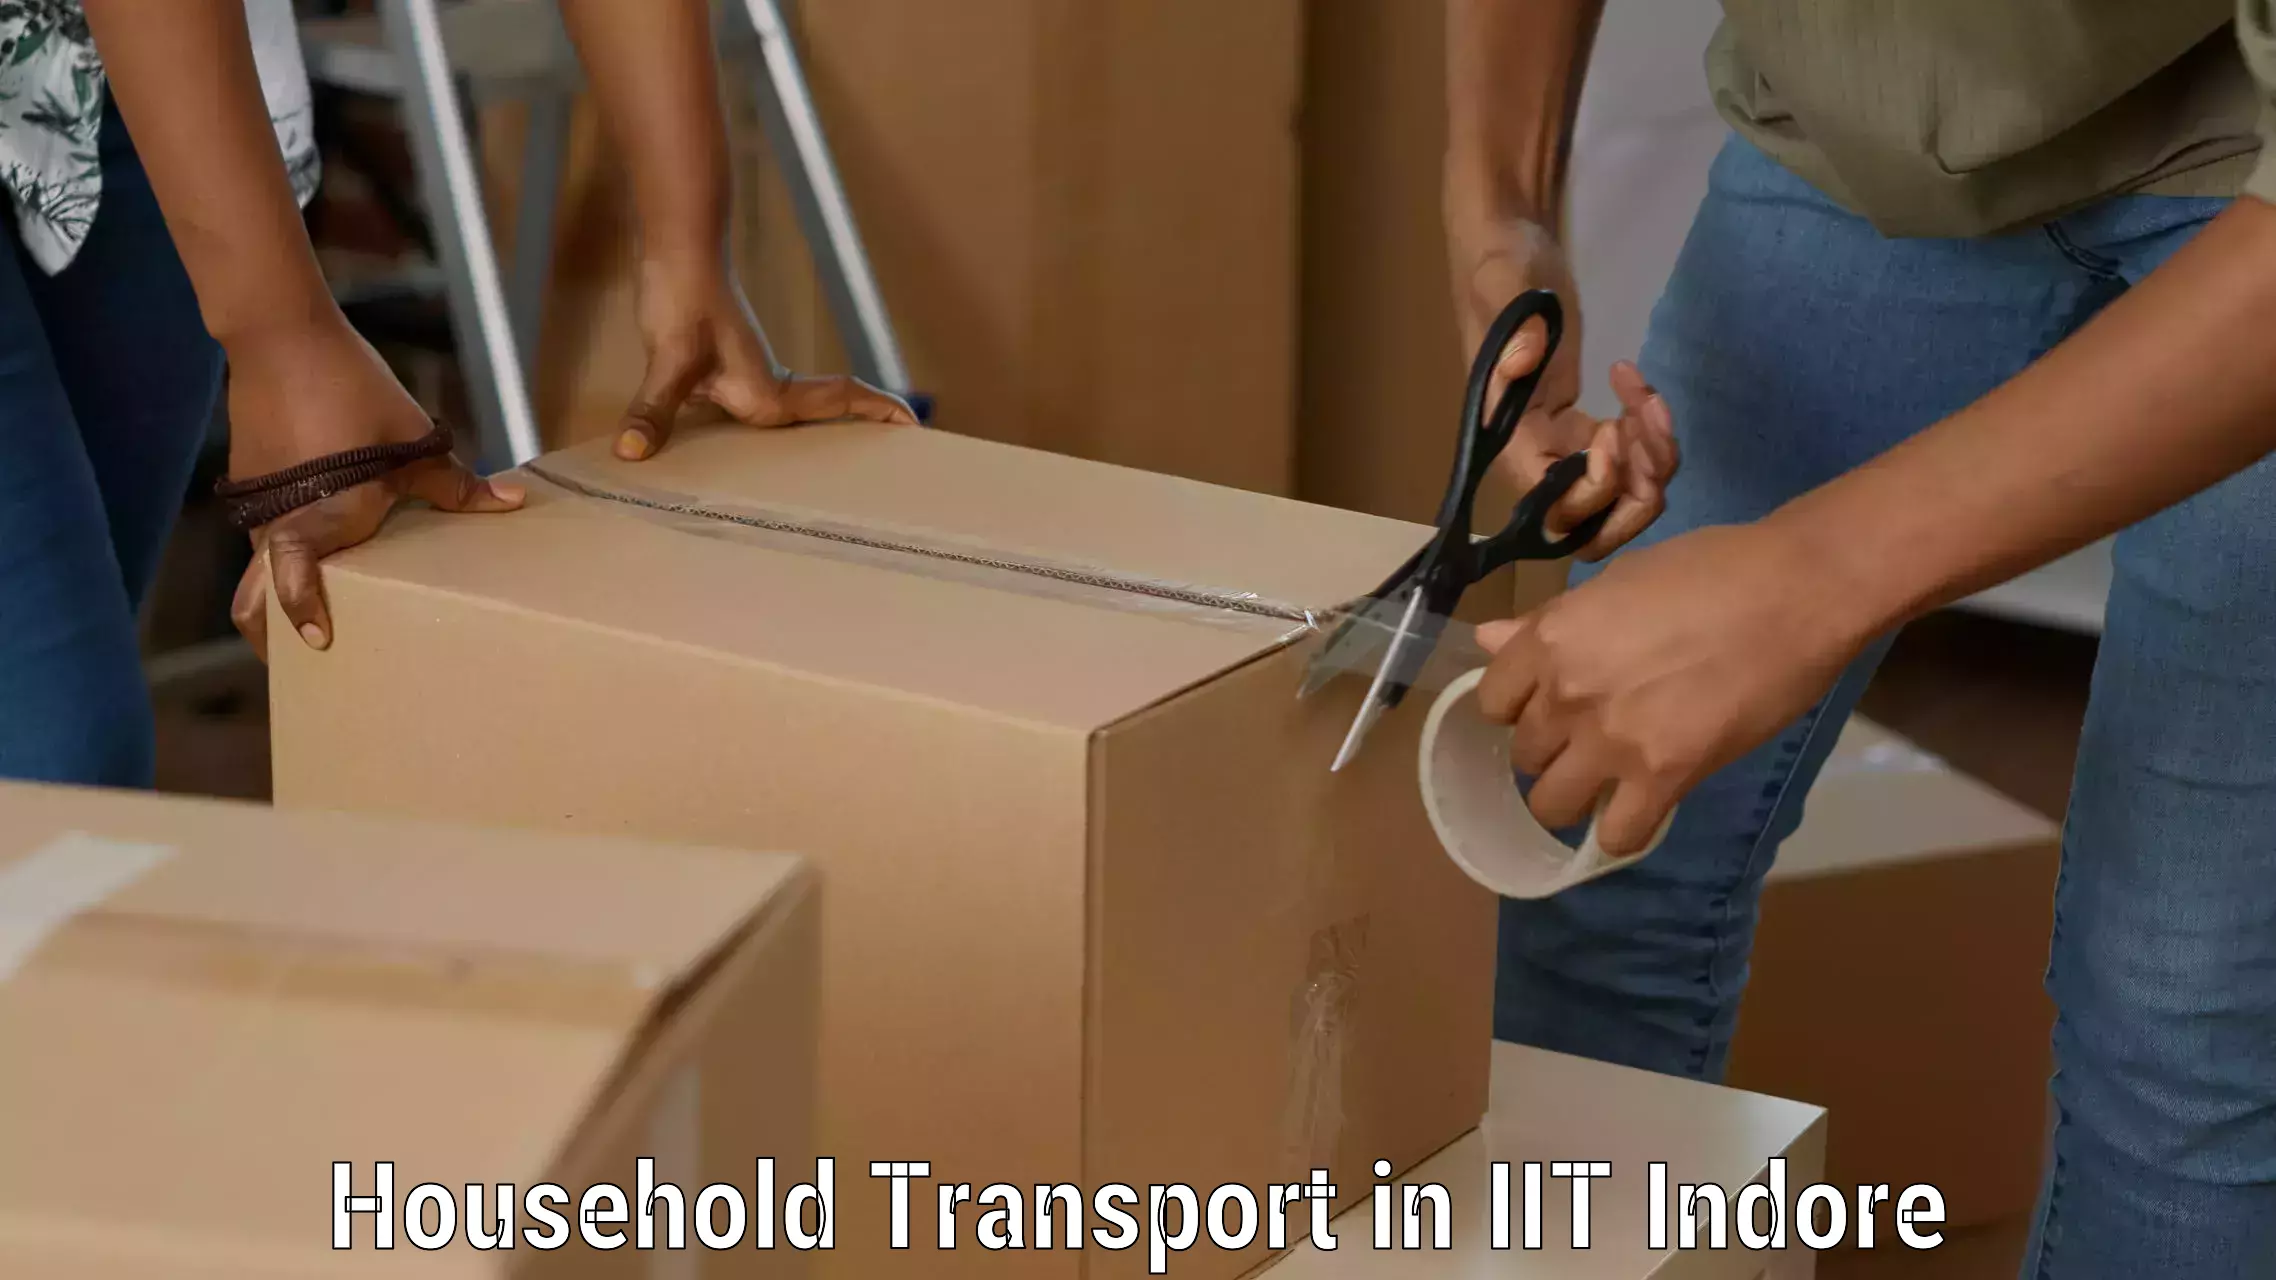 Advanced household relocation in IIT Indore